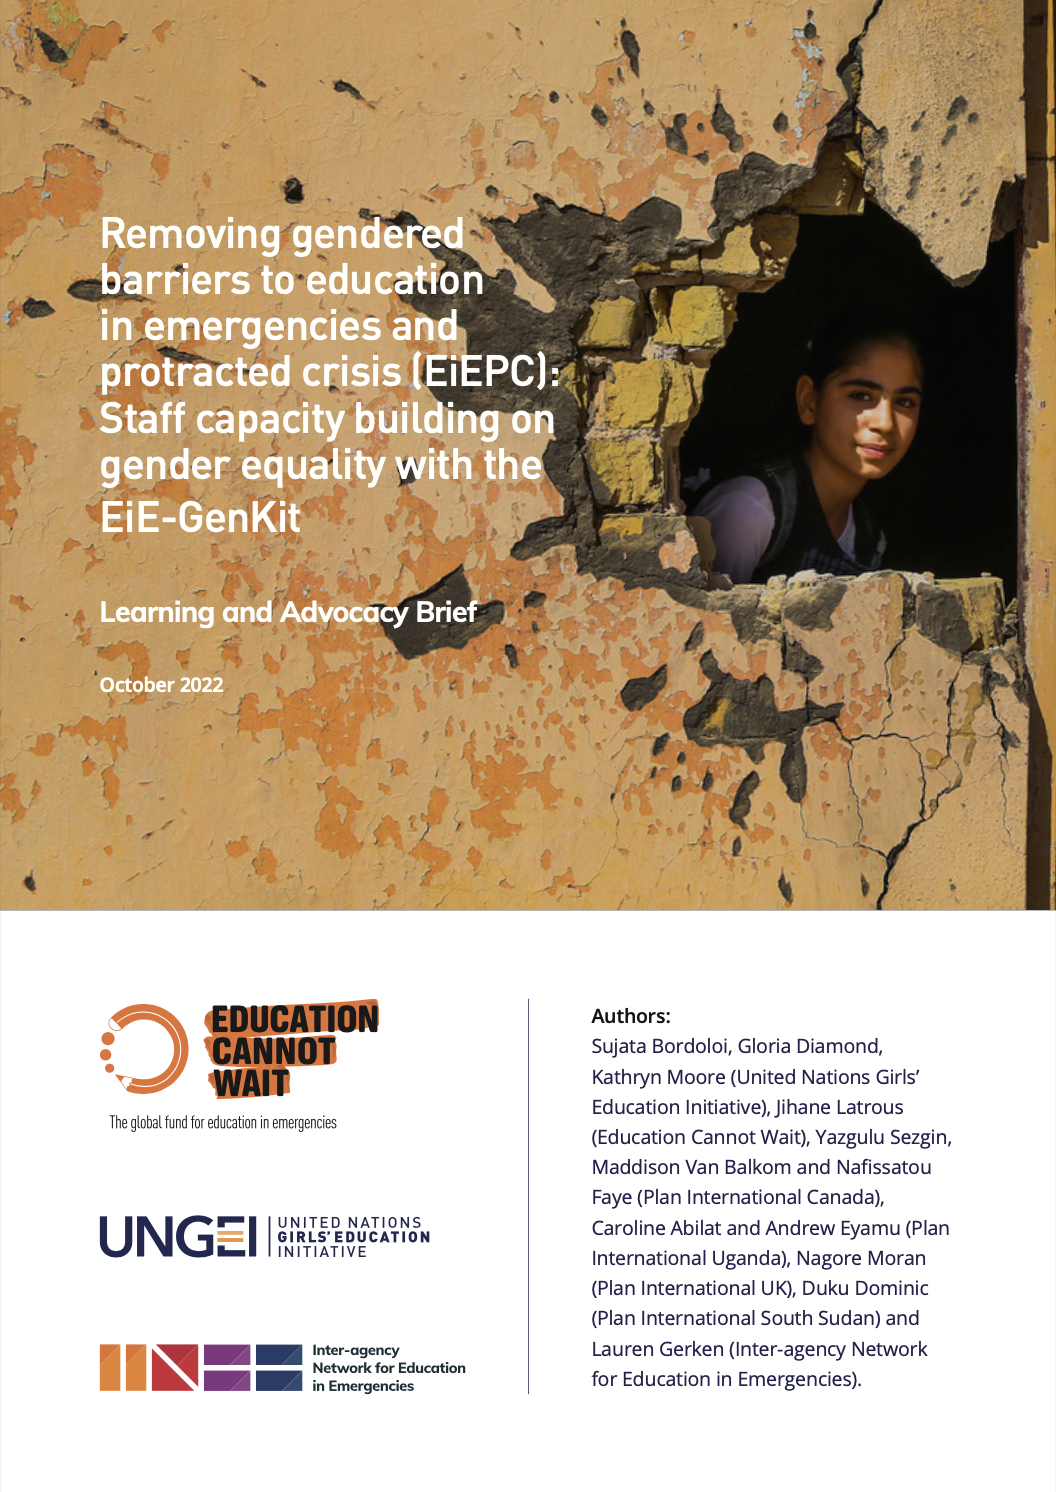  Removing gendered barriers to education in emergencies and protracted crisis (EiEPC): Staff capacity building on gender equality with the EiE-GenKit